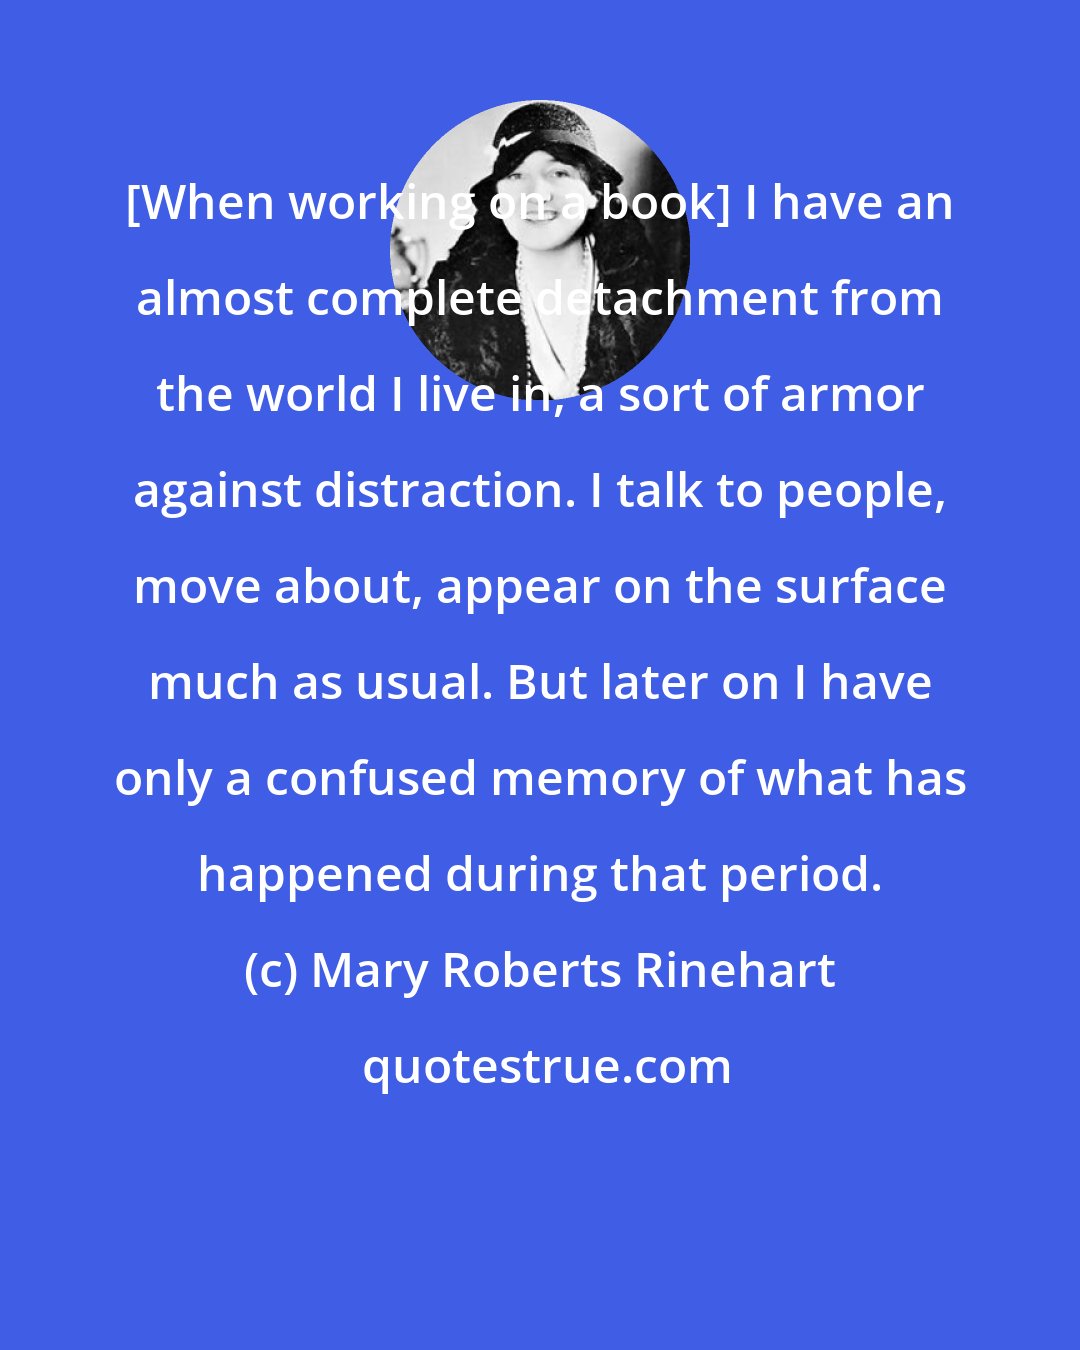 Mary Roberts Rinehart: [When working on a book] I have an almost complete detachment from the world I live in, a sort of armor against distraction. I talk to people, move about, appear on the surface much as usual. But later on I have only a confused memory of what has happened during that period.